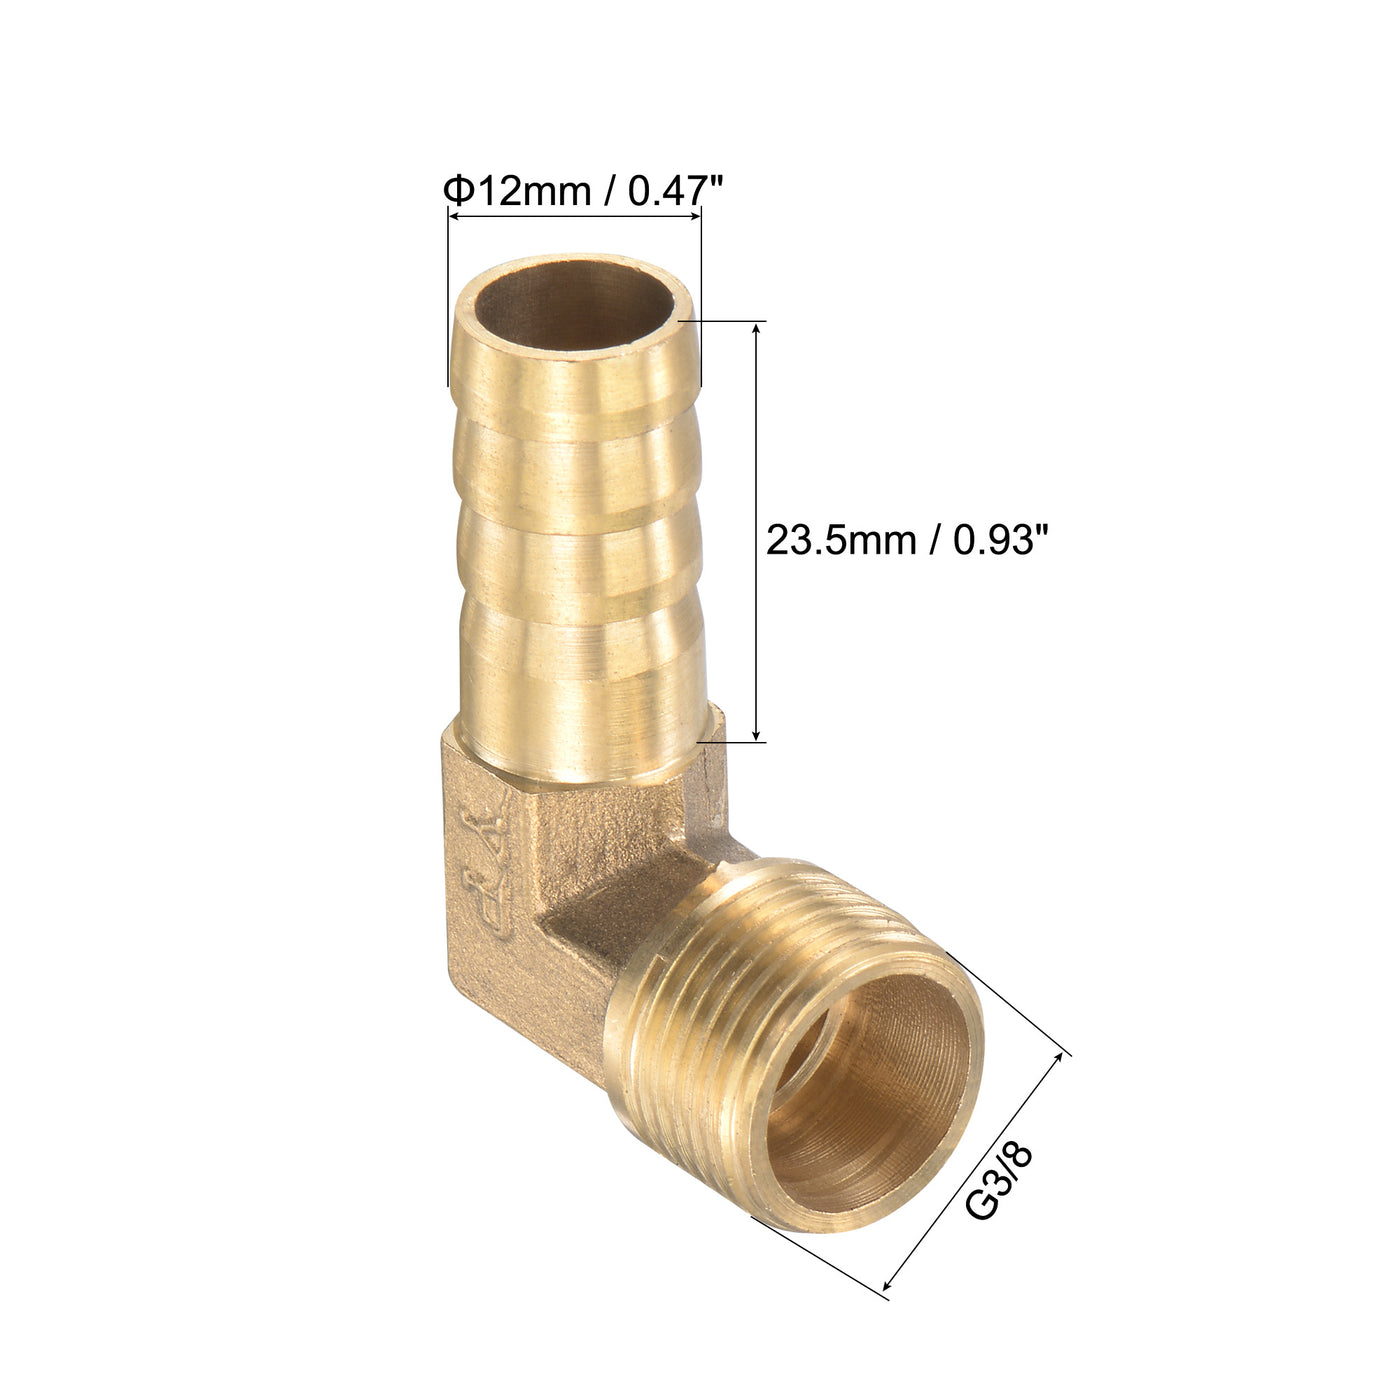 Uxcell Uxcell Brass Hose Barb Fitting Elbow 12mm x G1/2 Male Thread Right Angle Pipe Connector with Stainless Steel Hose Clamp, Pack of 2